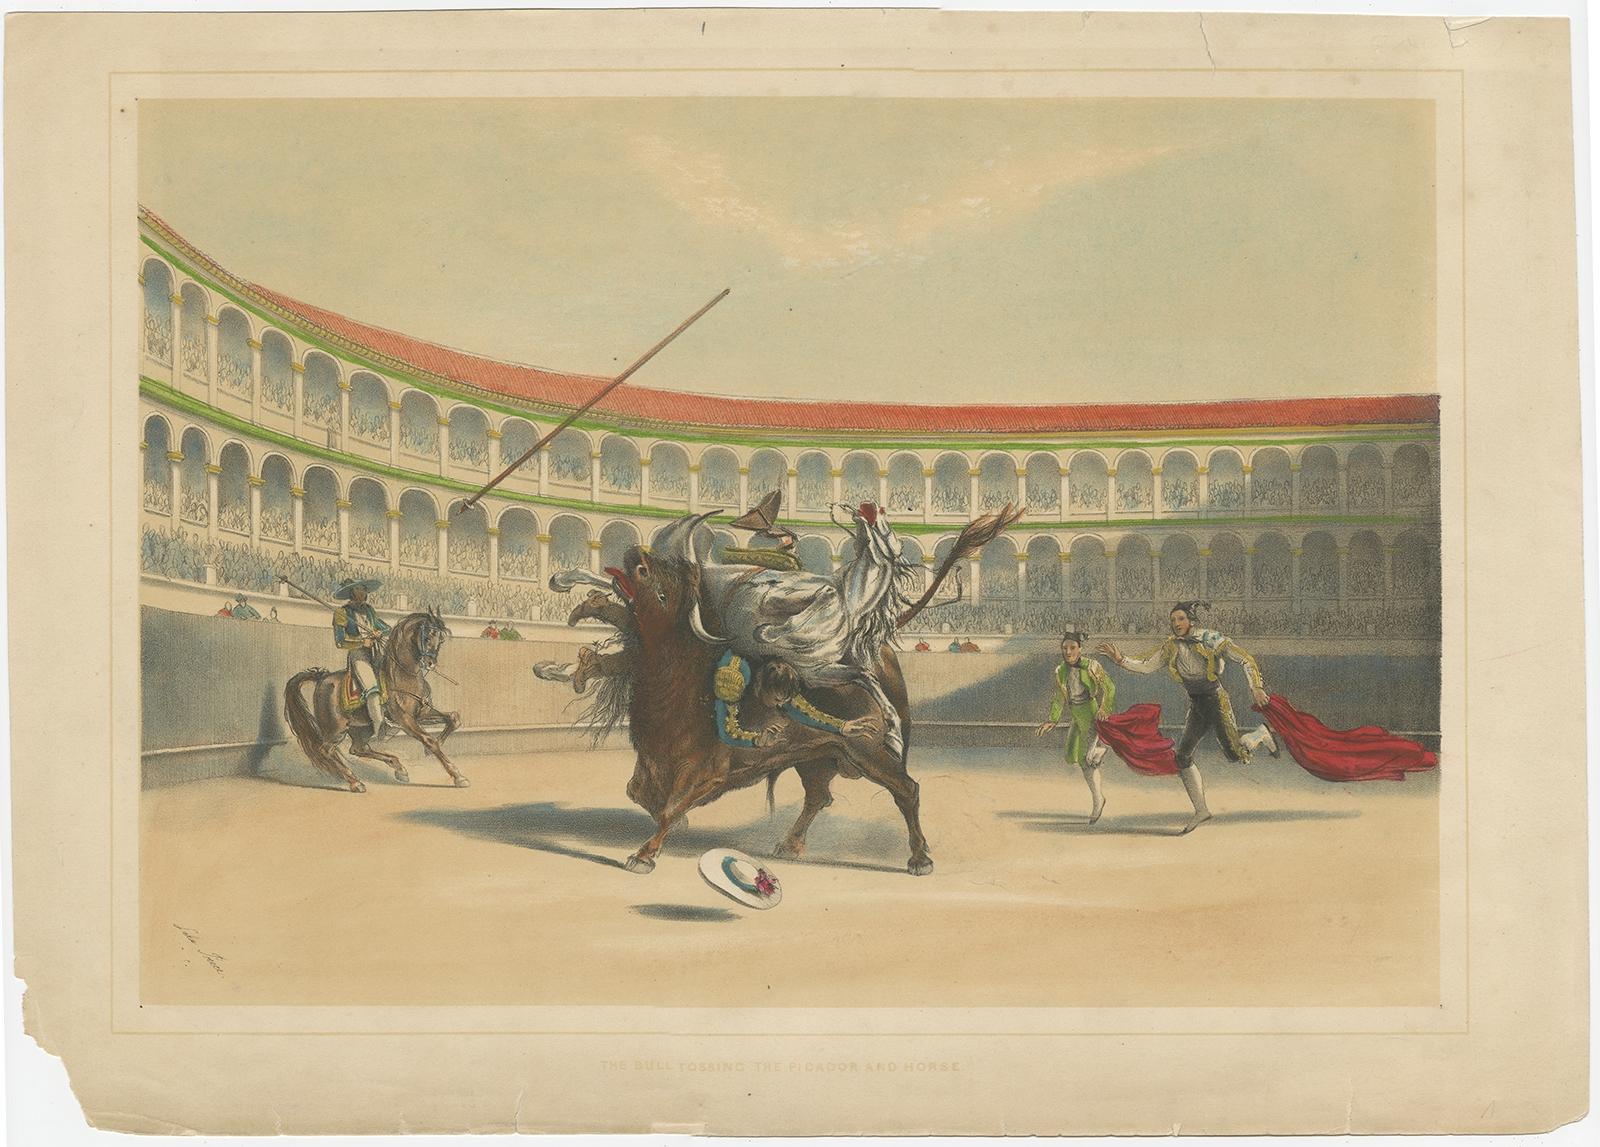 Antique print titled 'The Bull tossing the Picador and Horse'. 
Old lithograph showing a bullfighting scene. 

Artists and Engravers: Made after an oil painting by William Lake. 

Condition: Fair, general age-related toning, especially outside